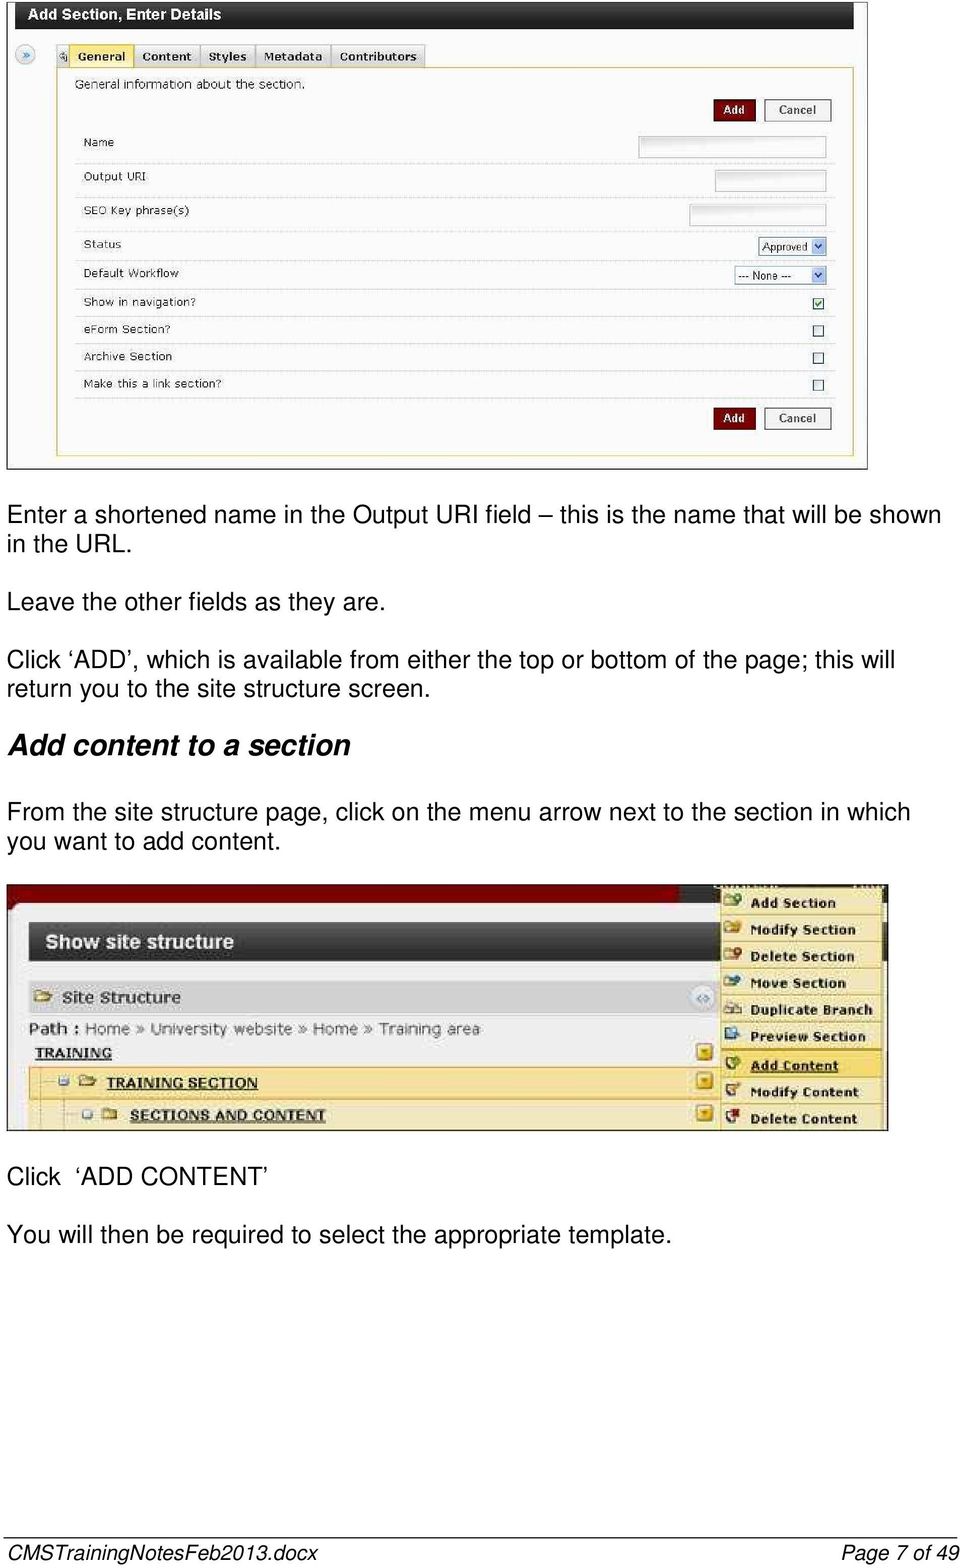 Click ADD, which is available from either the top or bottom of the page; this will return you to the site structure screen.